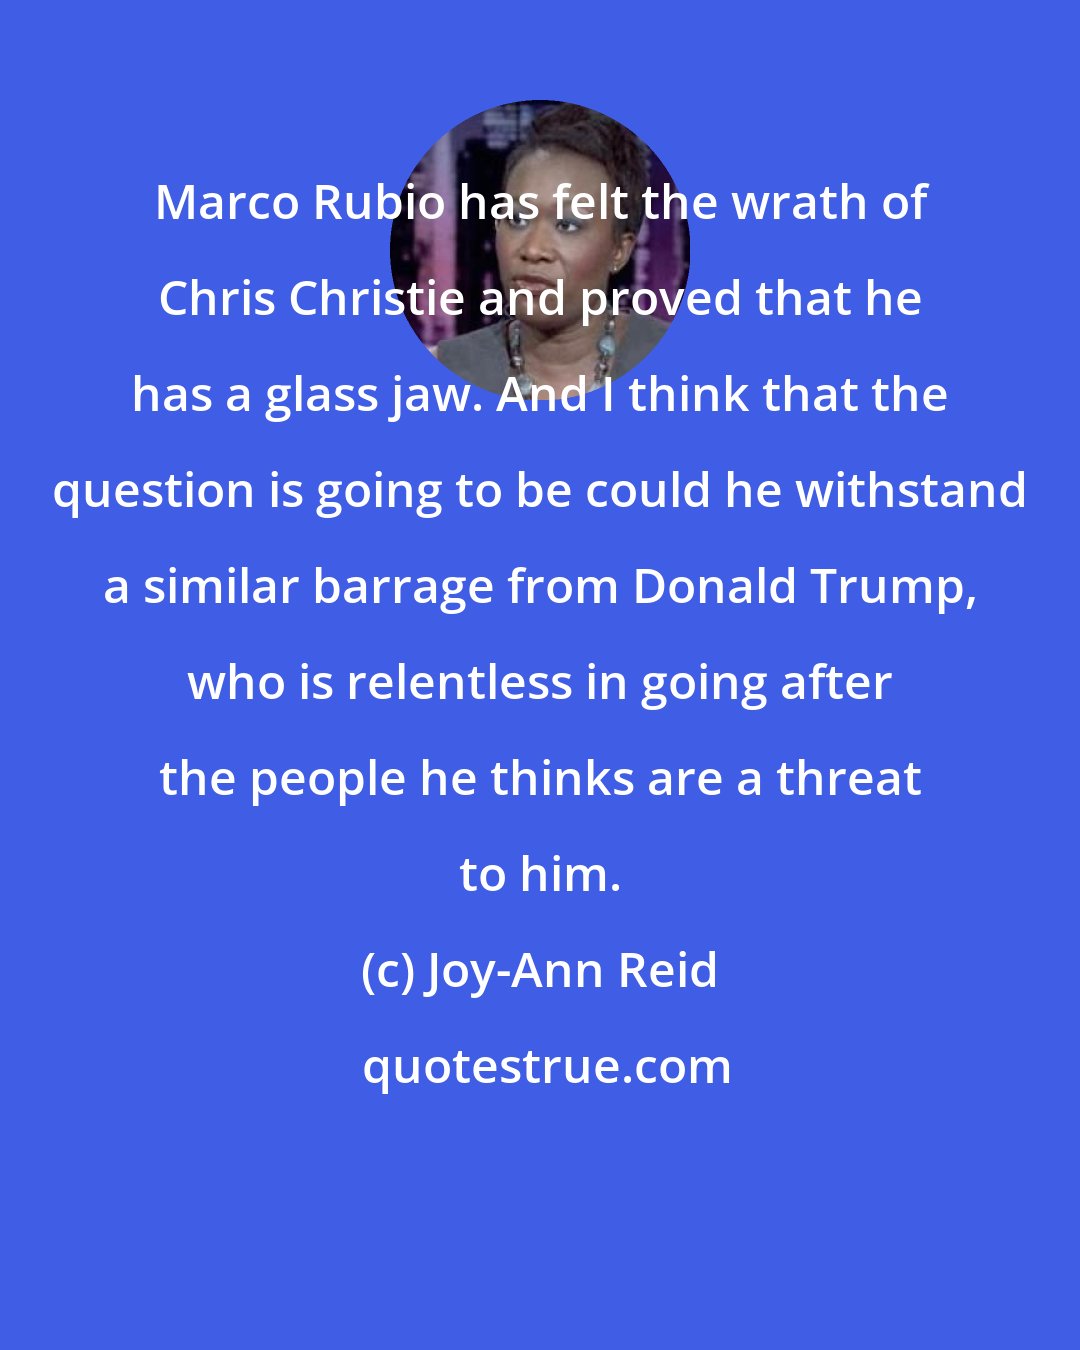 Joy-Ann Reid: Marco Rubio has felt the wrath of Chris Christie and proved that he has a glass jaw. And I think that the question is going to be could he withstand a similar barrage from Donald Trump, who is relentless in going after the people he thinks are a threat to him.